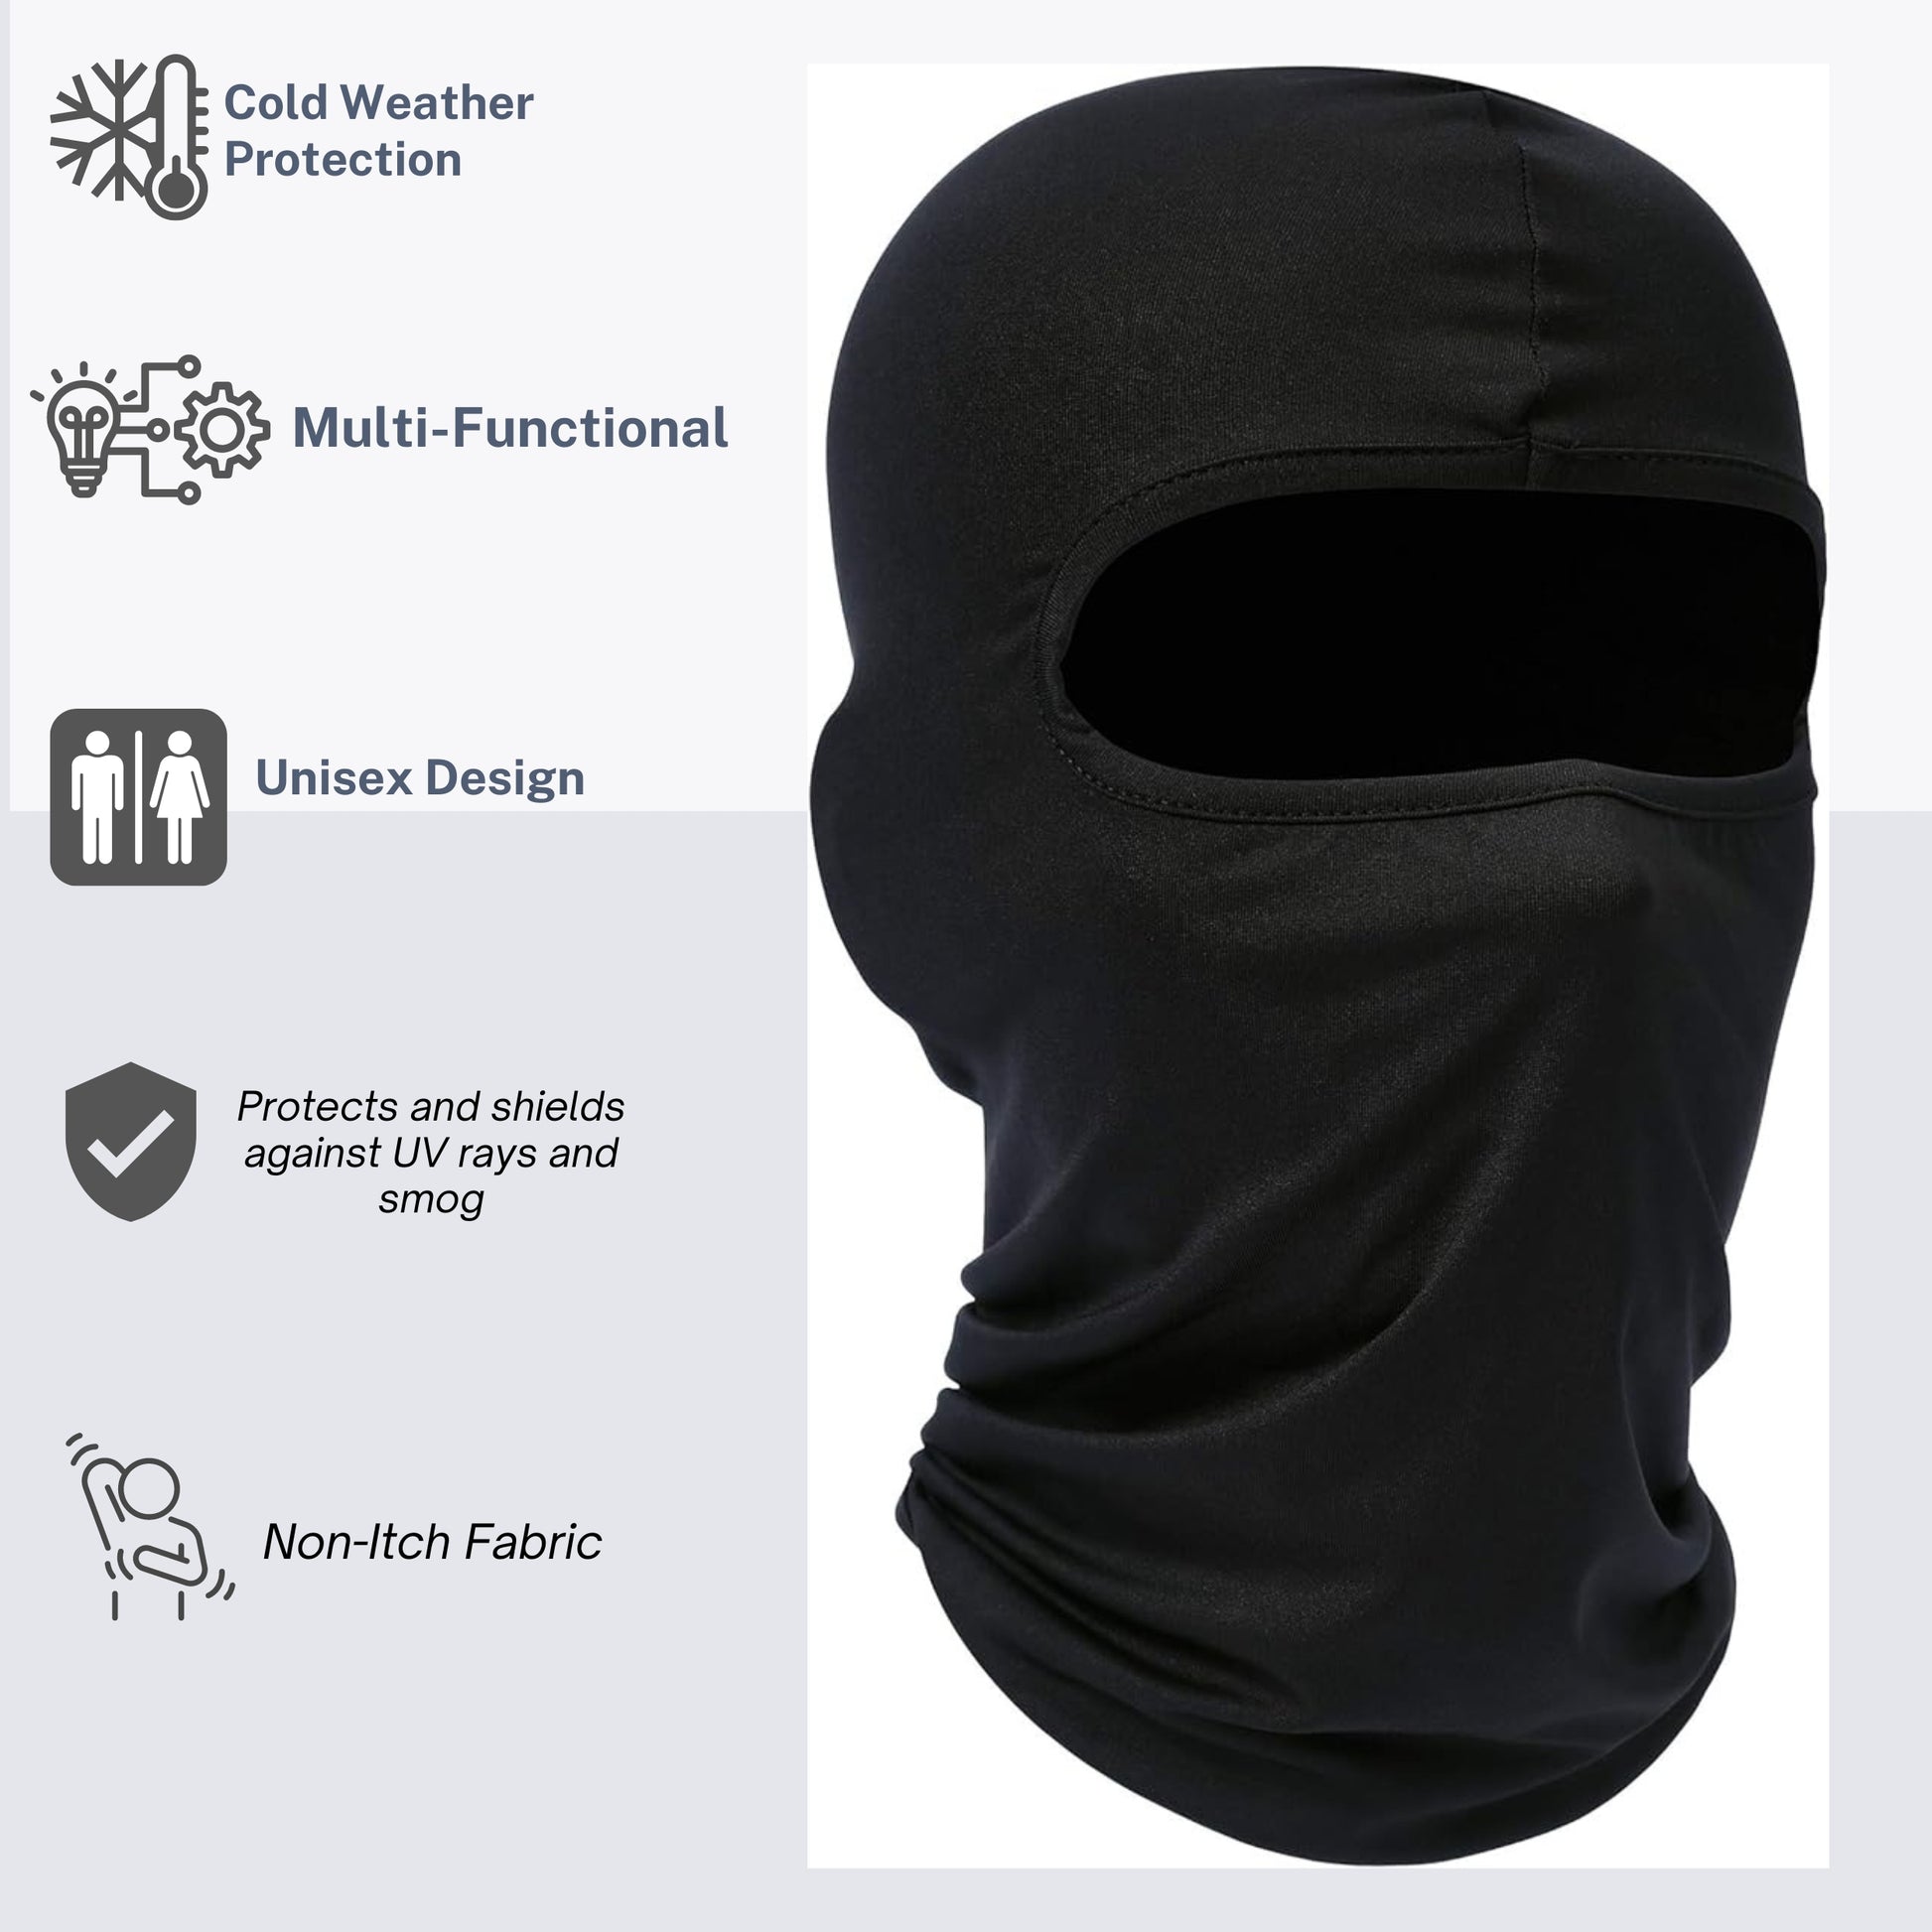 Cold weather protection, multifunctional, unisex design, protects against UV rays and smog non-inch fabric balaclava ski mass